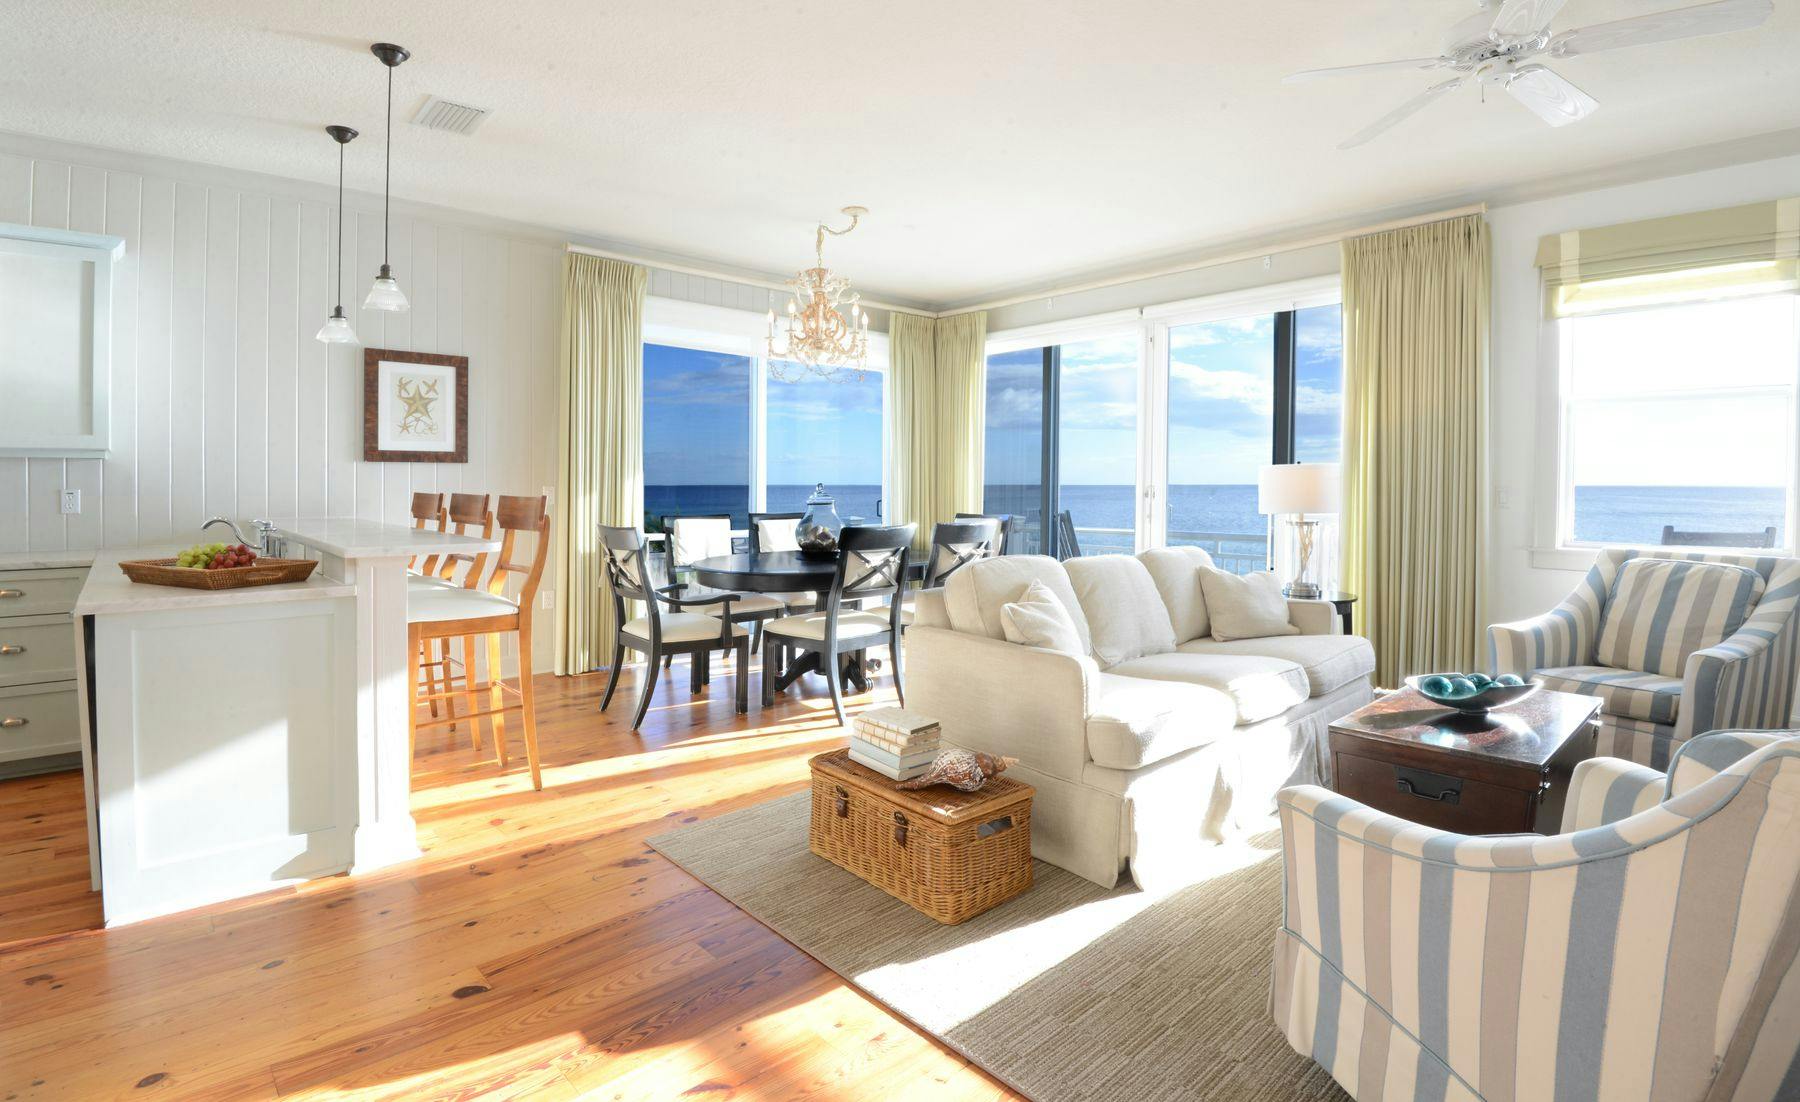 Bright and open living space with a view at an Anna Maria Island vacation rental.